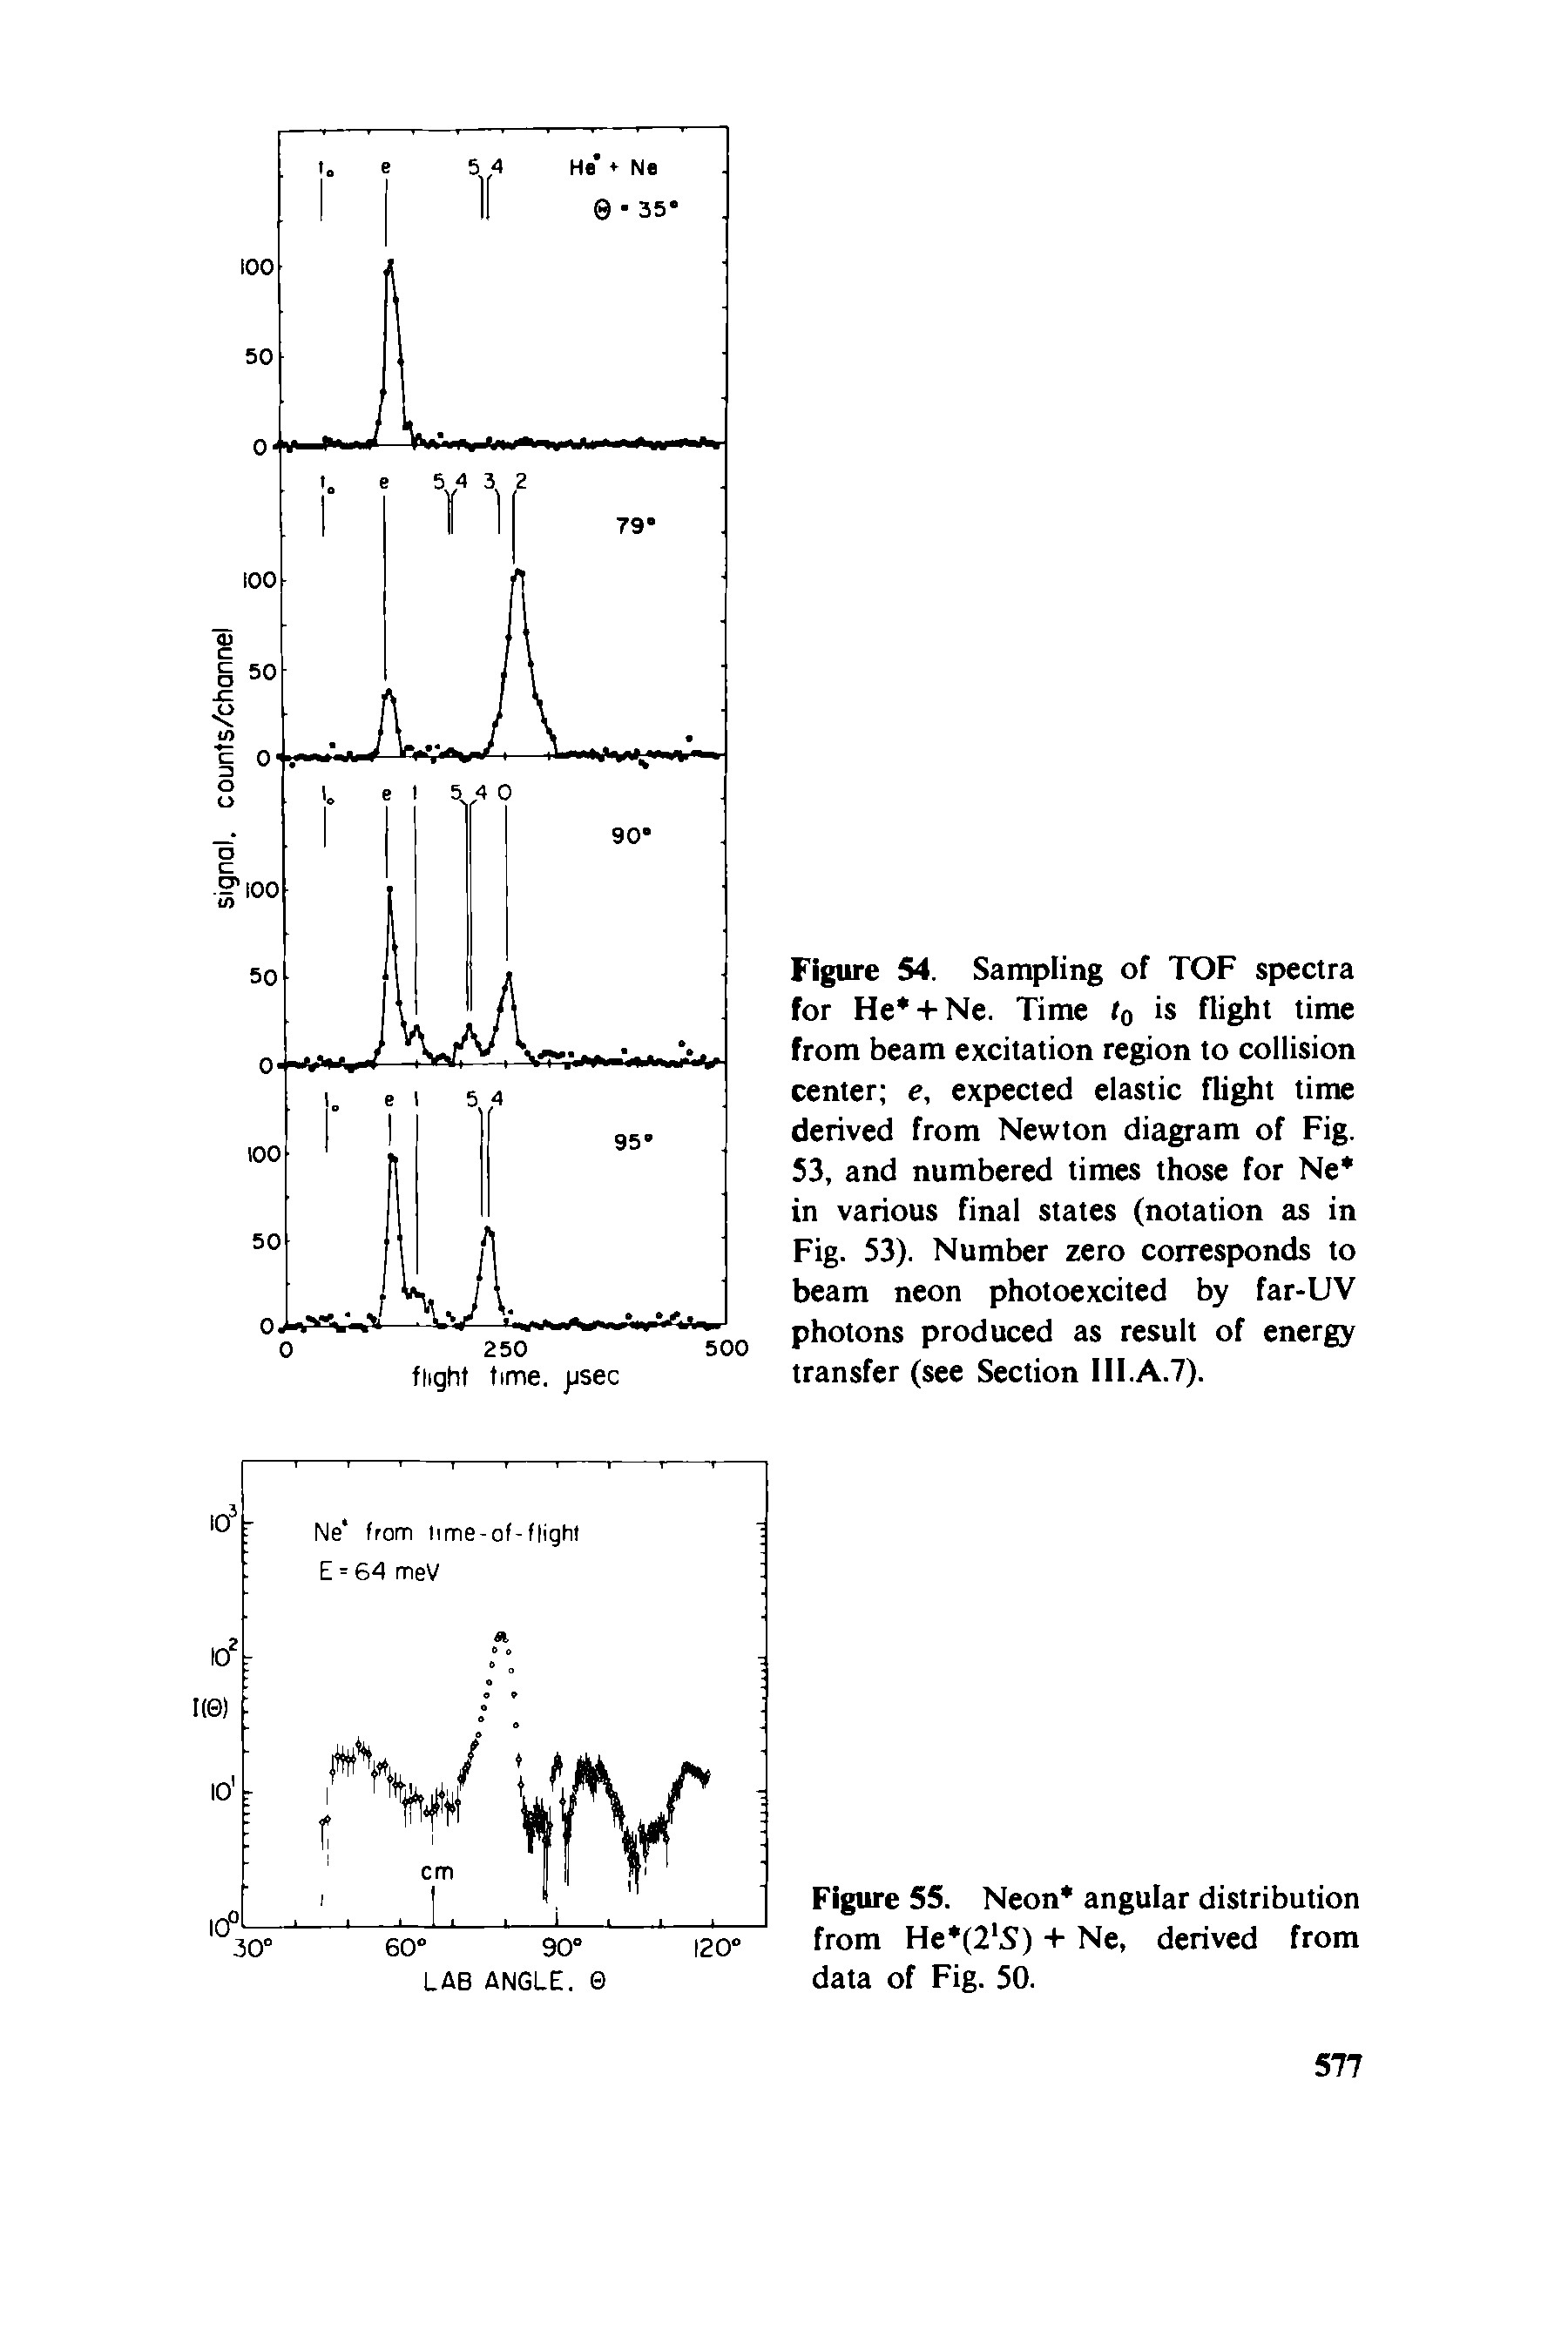 Figure 54. Sampling of TOF spectra for He + Ne. Time t0 is flight time from beam excitation region to collision center e, expected elastic flight time derived from Newton diagram of Fig. 53, and numbered times those for Ne in various final states (notation as in Fig. 53). Number zero corresponds to beam neon photoexcited by far-UV photons produced as result of energy transfer (see Section III.A.7).